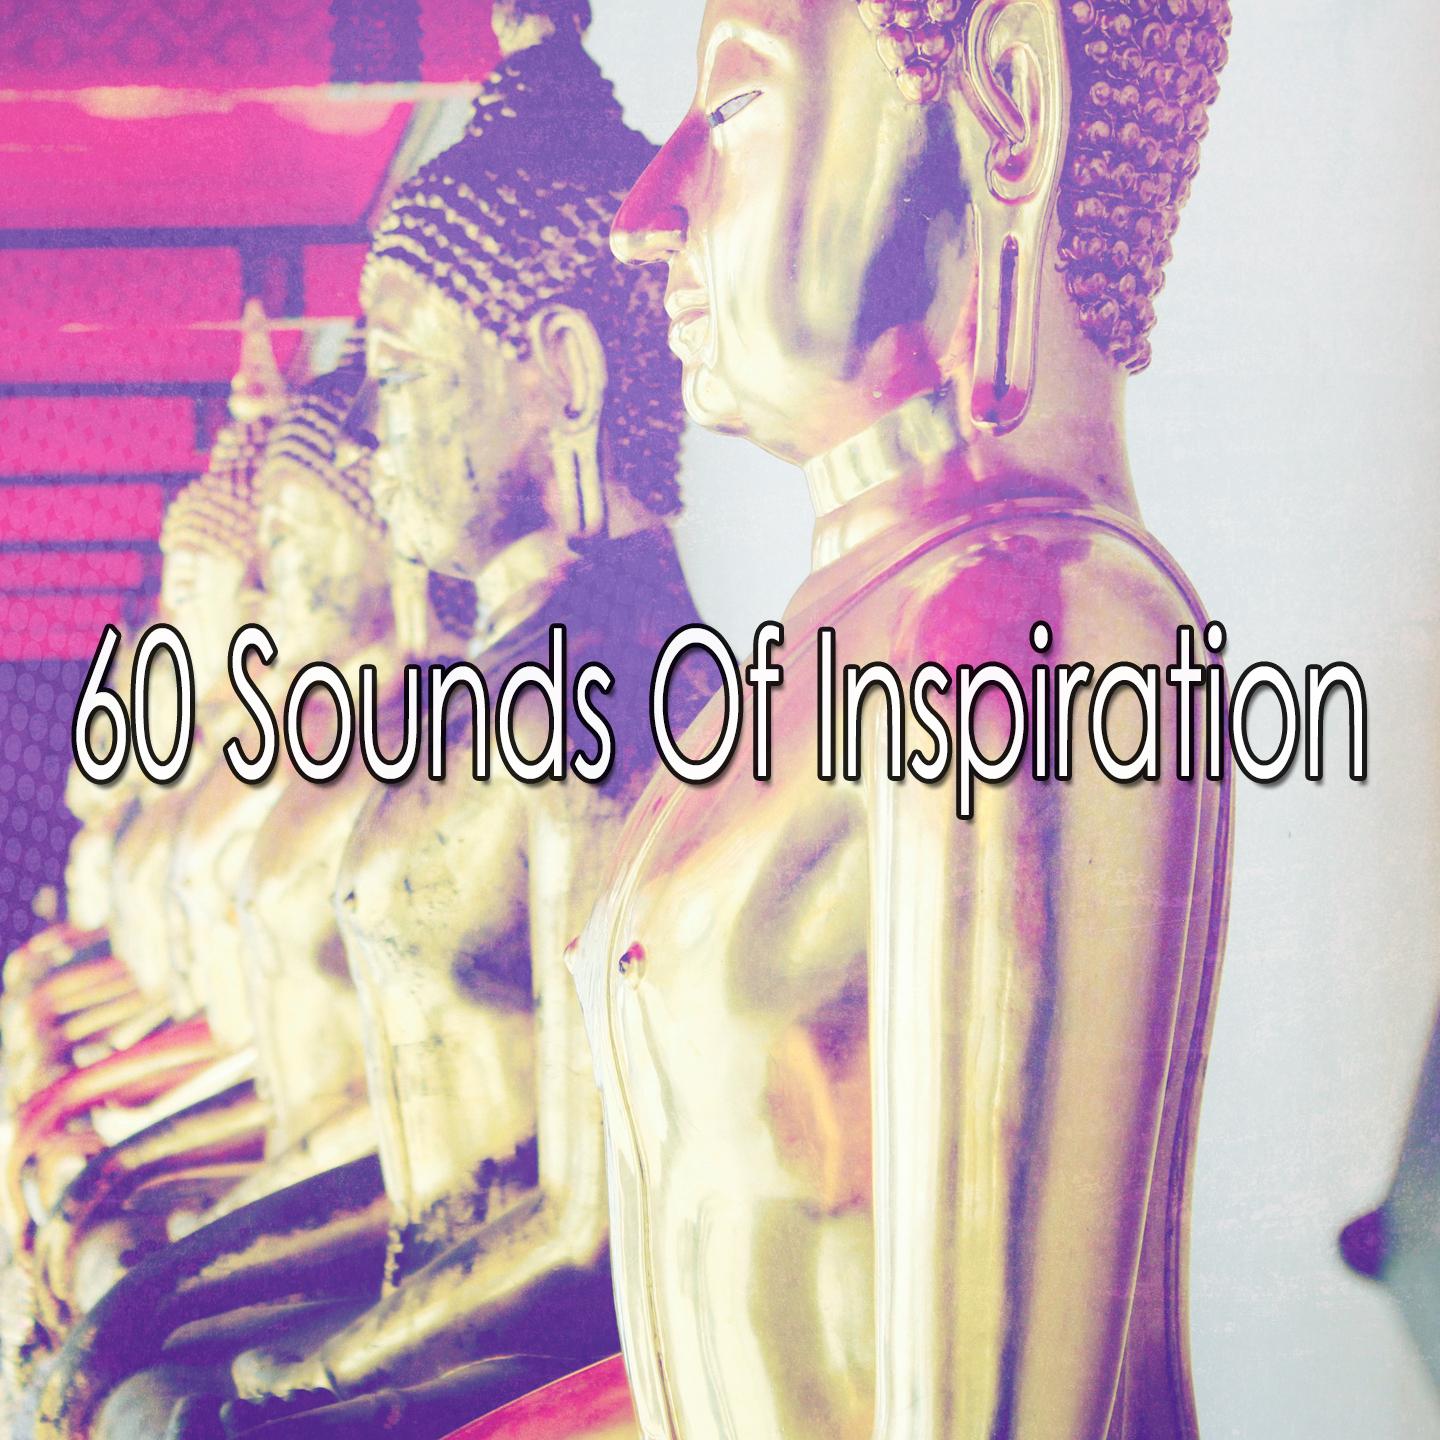 60 Sounds of Inspiration